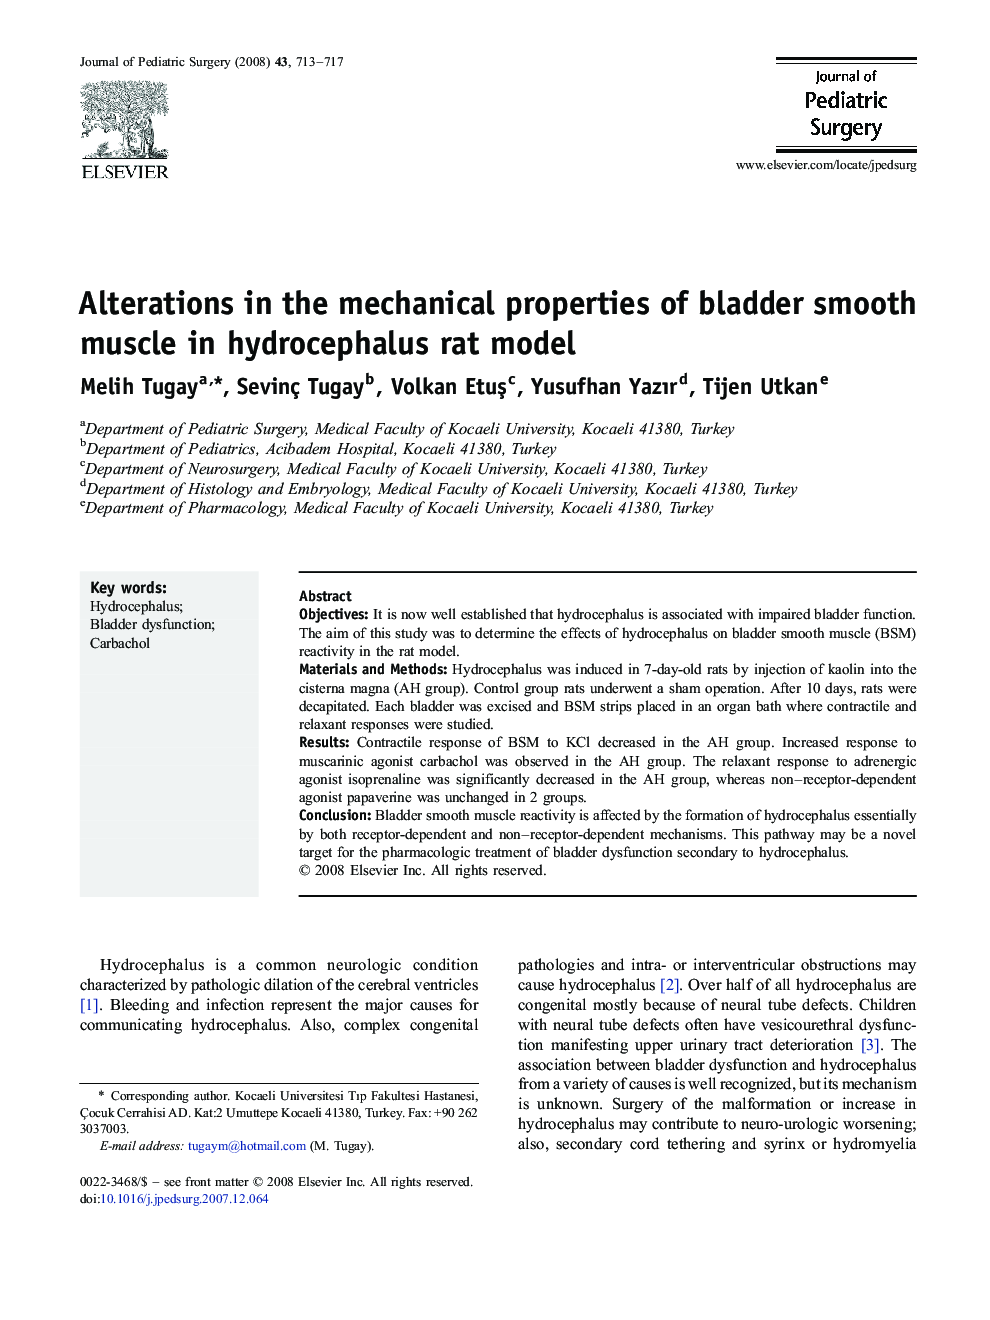 Alterations in the mechanical properties of bladder smooth muscle in hydrocephalus rat model